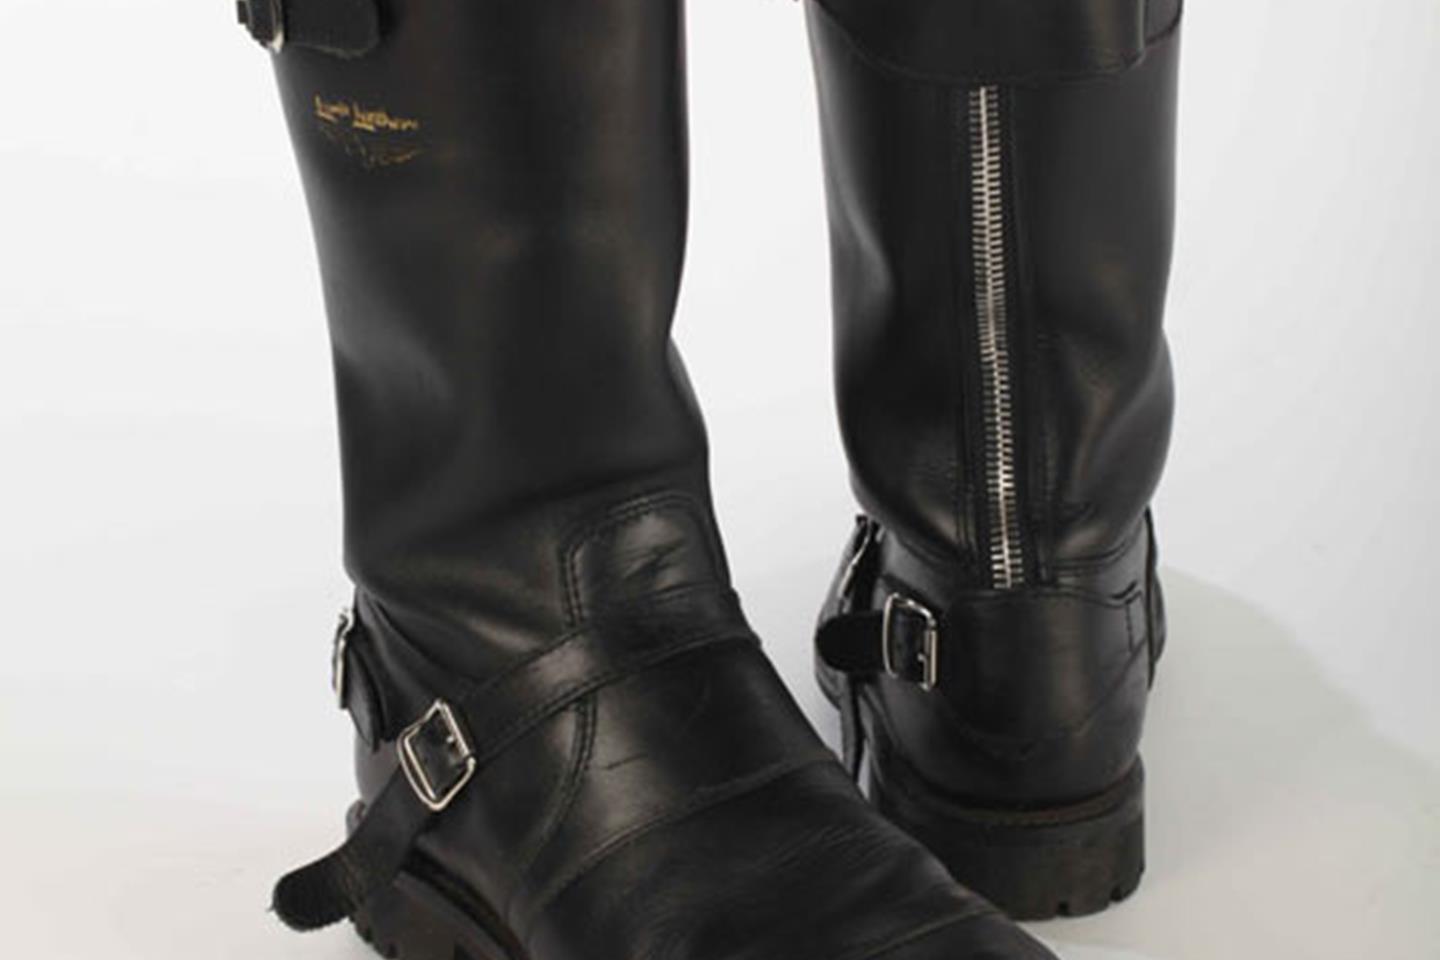 lewis leathers boots